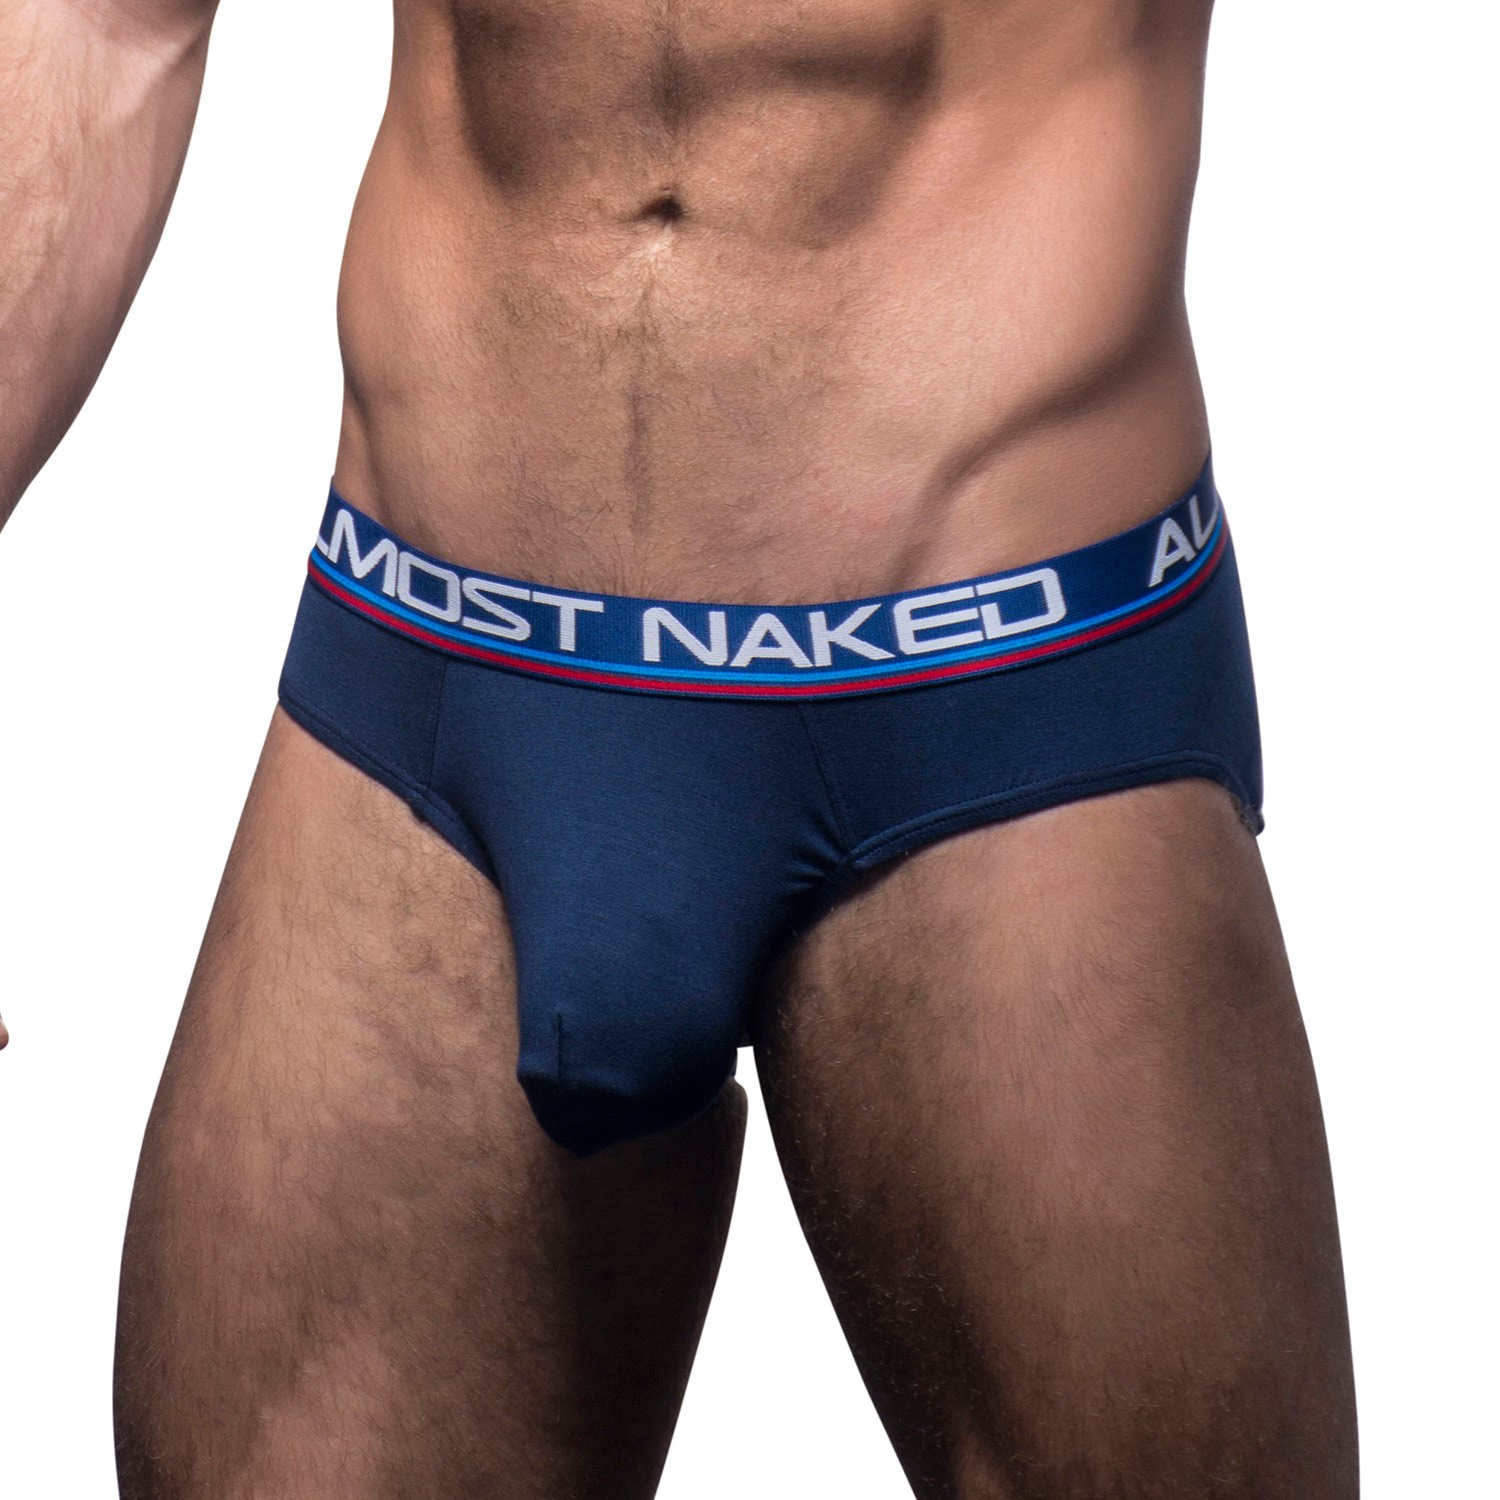 Andrew Christian Almost Naked Sports Workout Brief